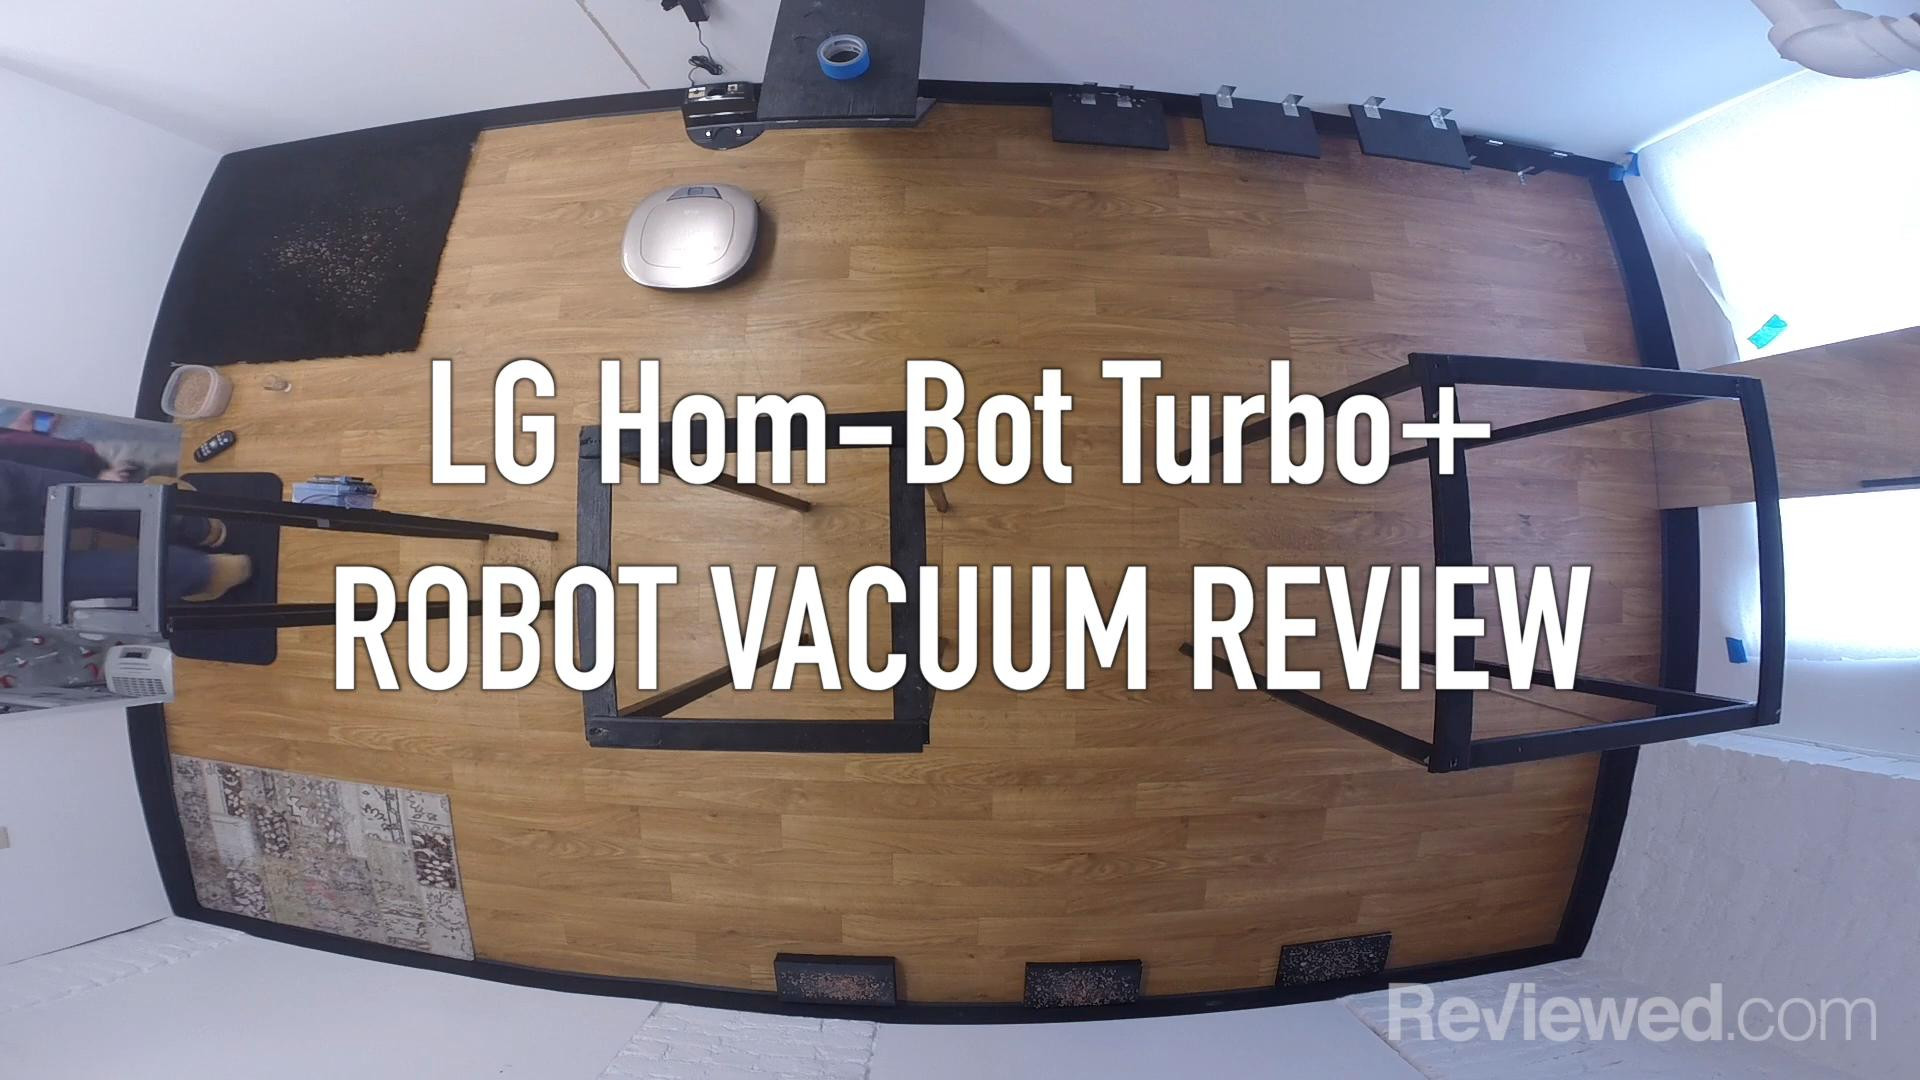 14 Fashionable Hardwood Floor Vacuum Reviews 2017 2024 free download hardwood floor vacuum reviews 2017 of lg hom bot turbo cr5765gd robot vacuum review reviewed com robot in lg hom bot turbo cr5765gd robot vacuum review reviewed com robot vacuums